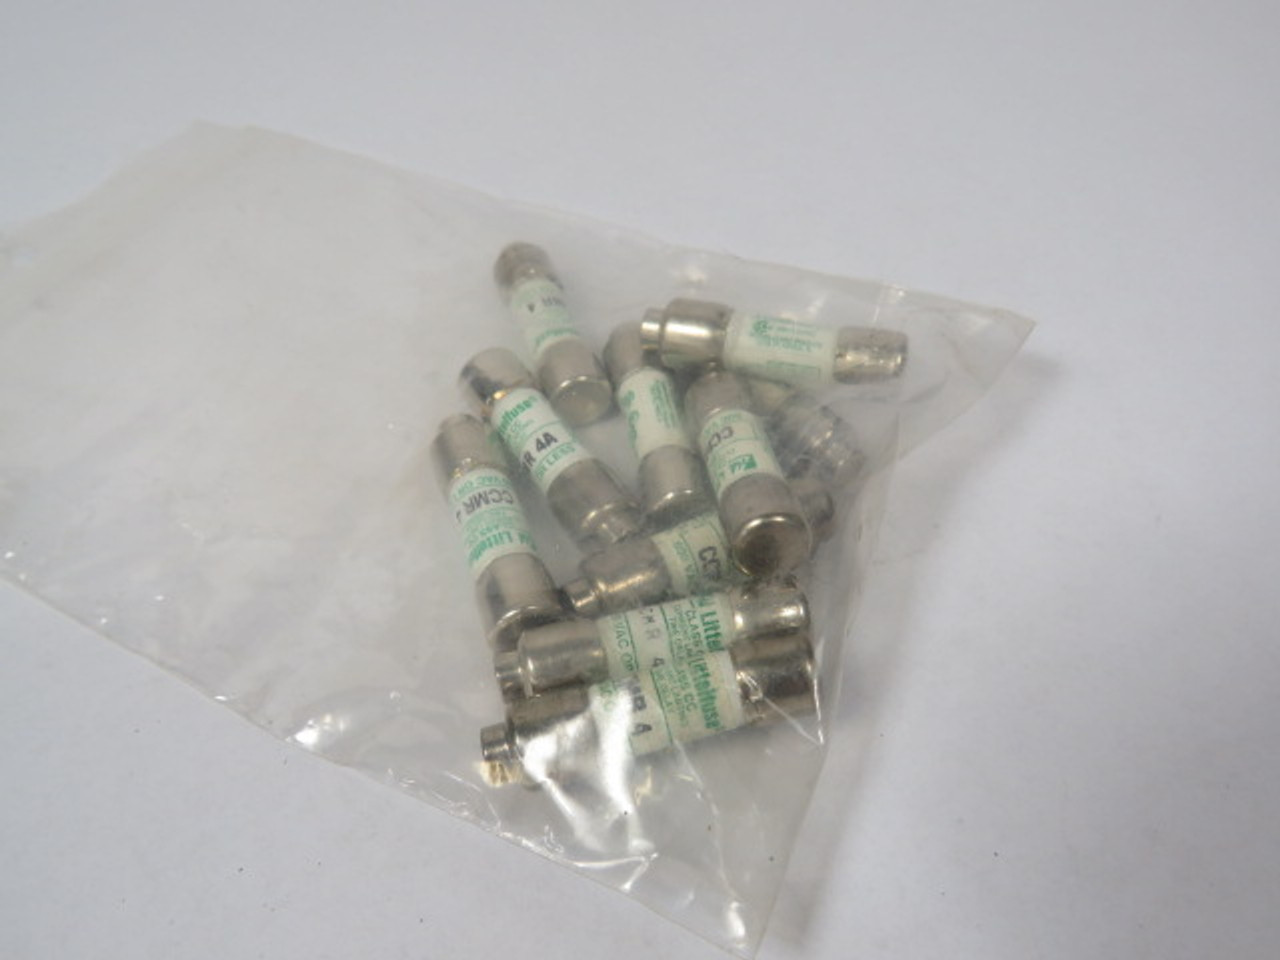 Littelfuse CCMR-4 Current Limiting Time Delay Fuse 4A 600V Lot of 10 USED